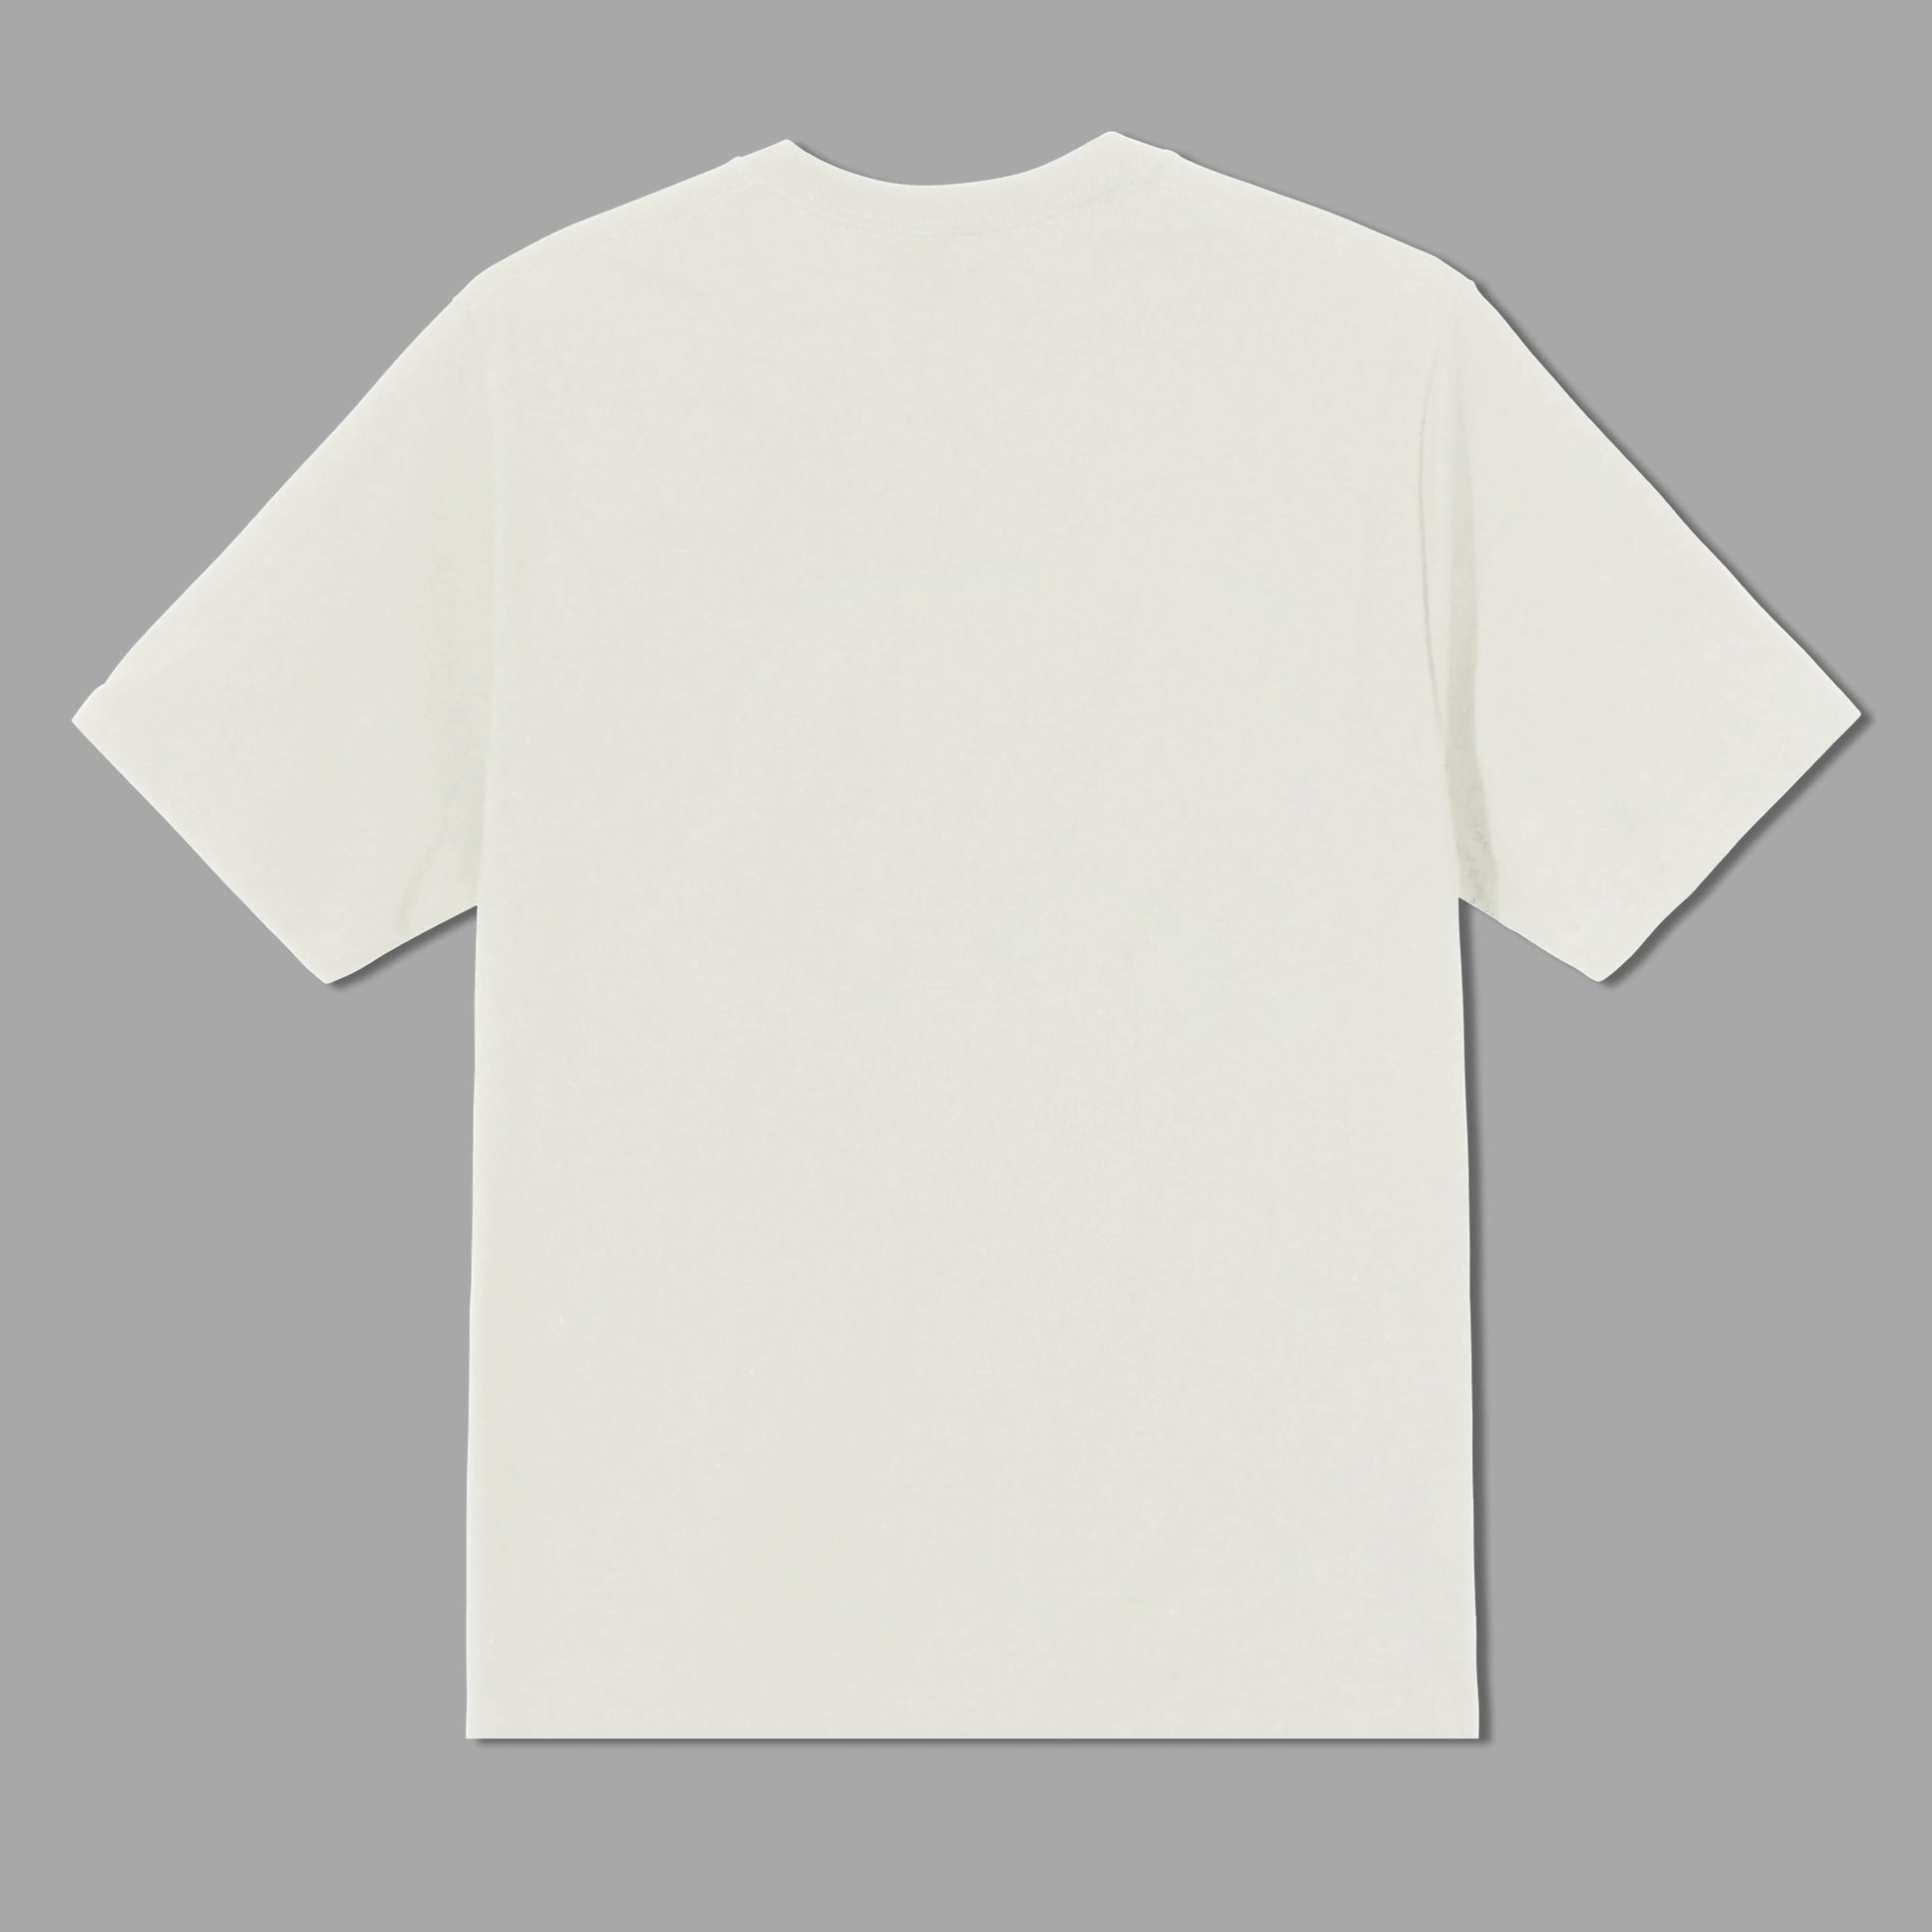 the solid off white boxy fit tee